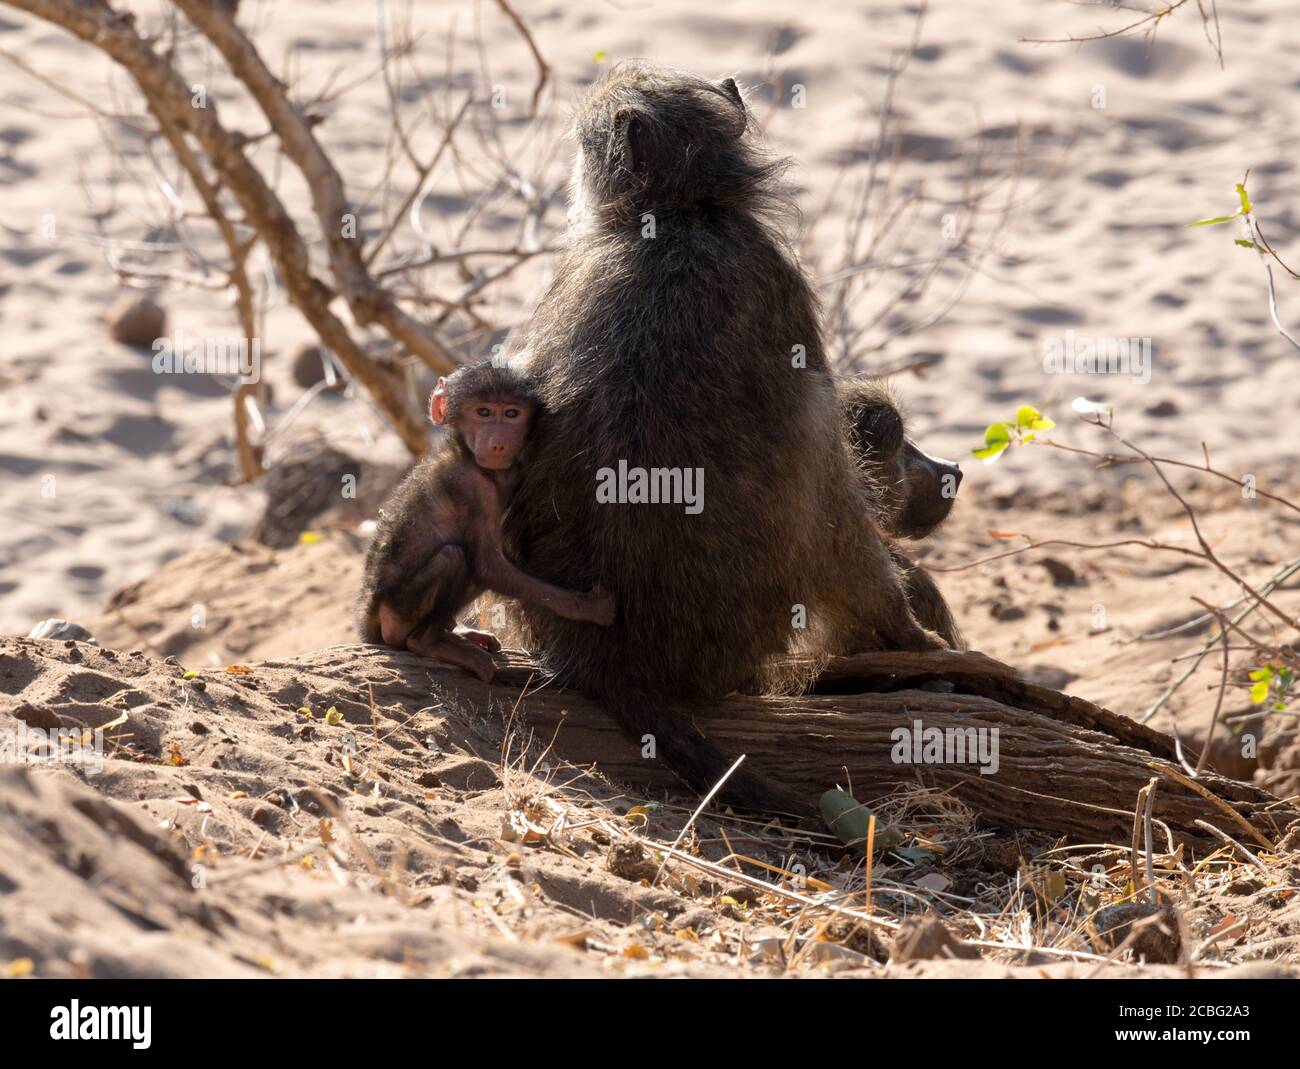 Baby baboon sitting tight next to mother and holding her by the hair and staring at camera man Stock Photo